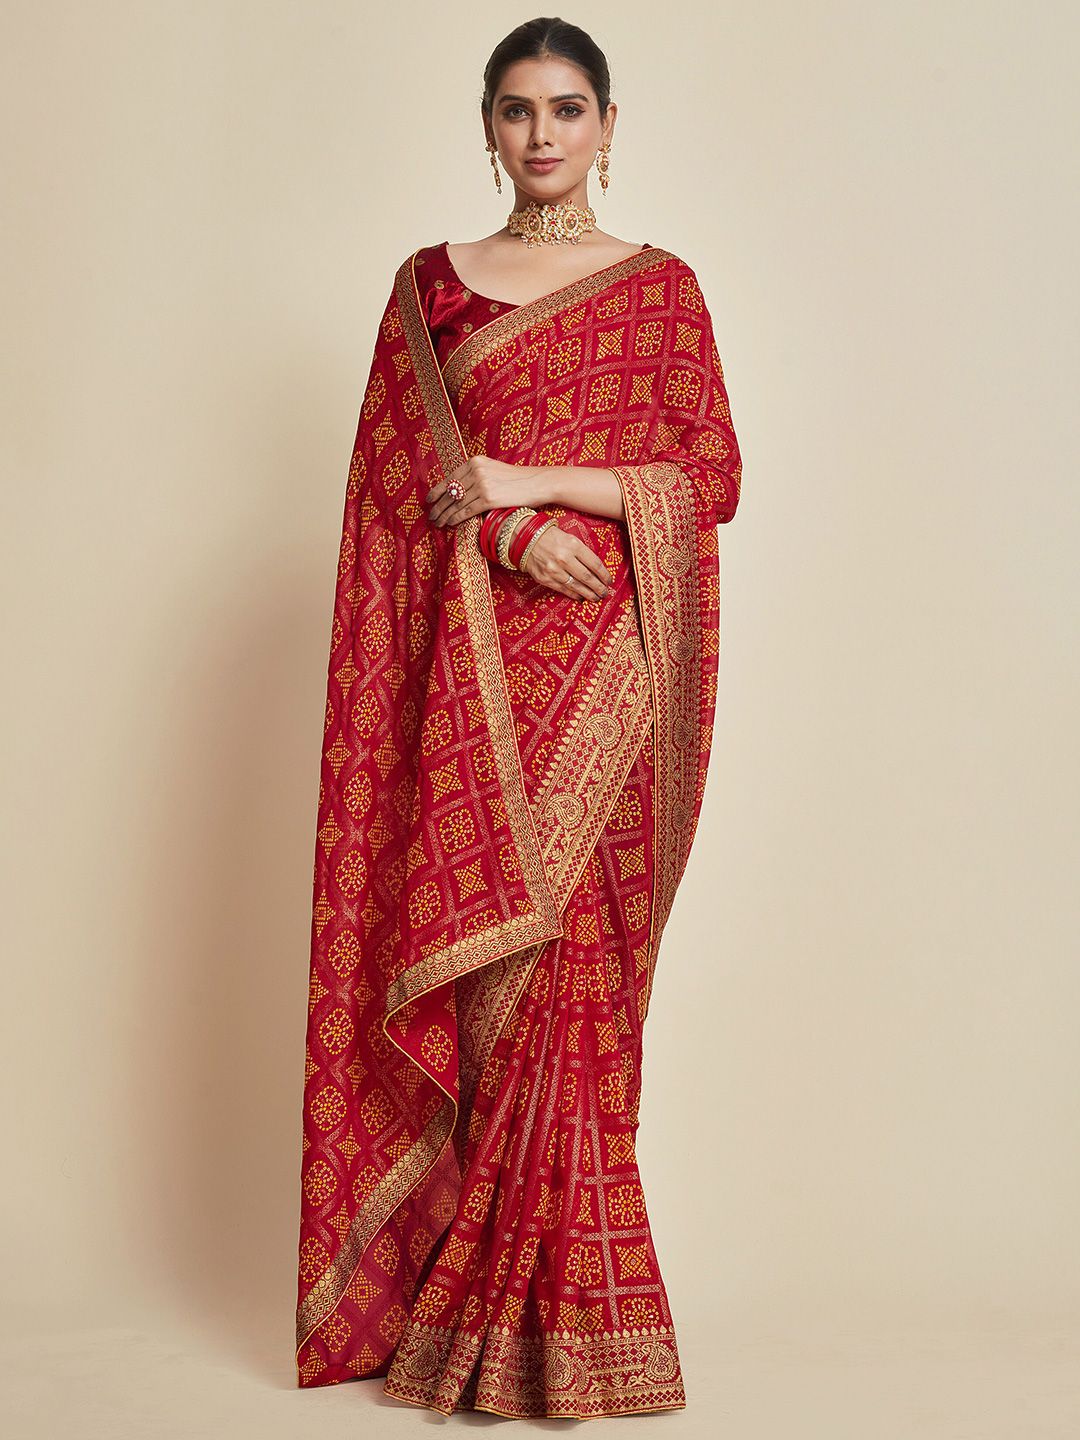 Sangria Bandhani Embroidered Poly Georgette Saree Price in India